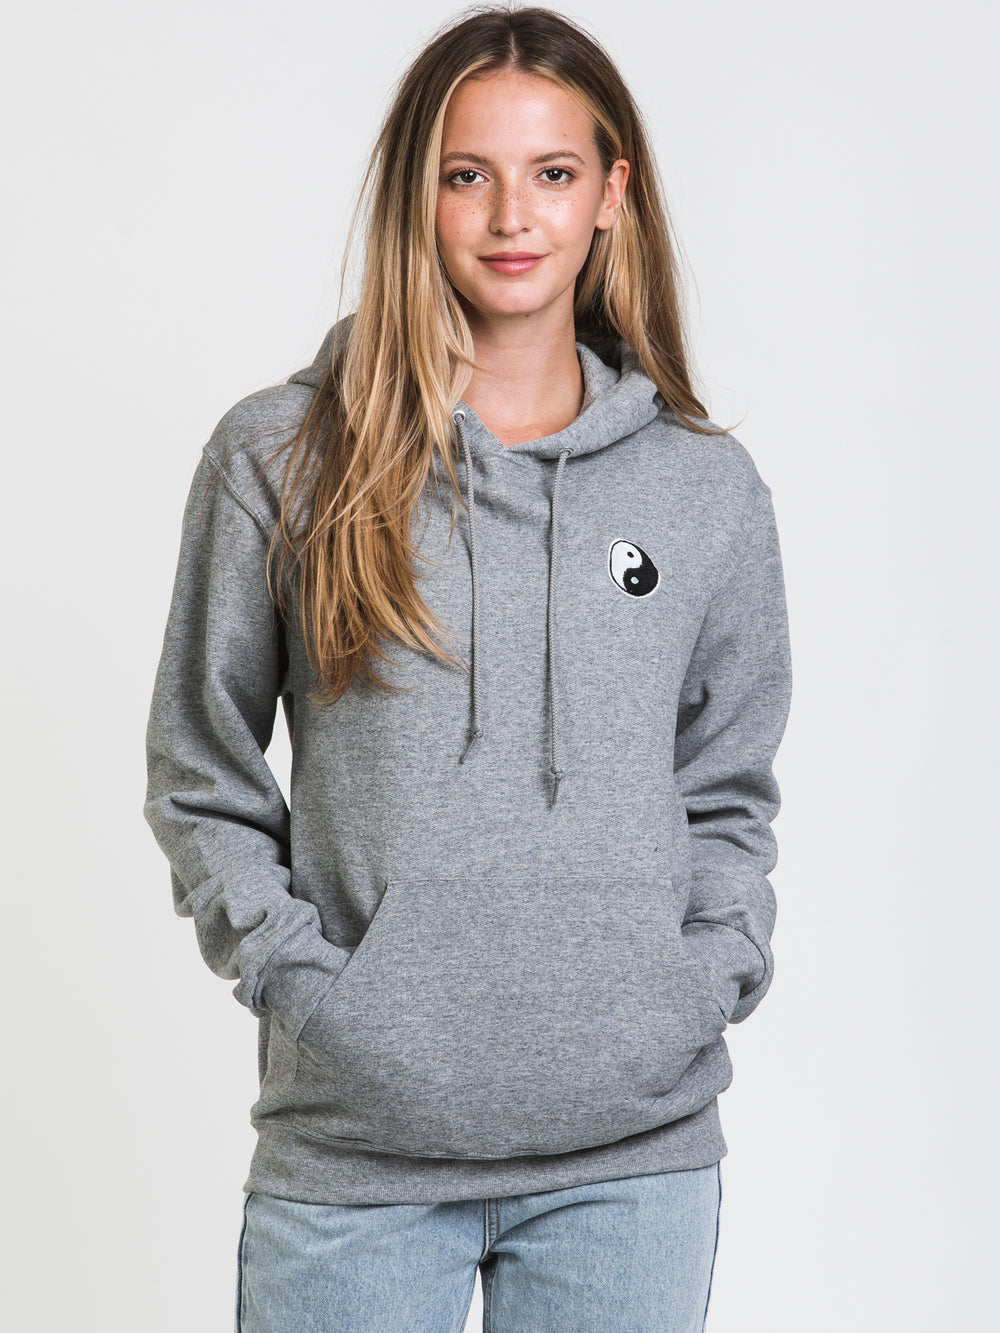 HOTLINE APPAREL YING YANG EMBROIDERED HOODIE  - CLEARANCE